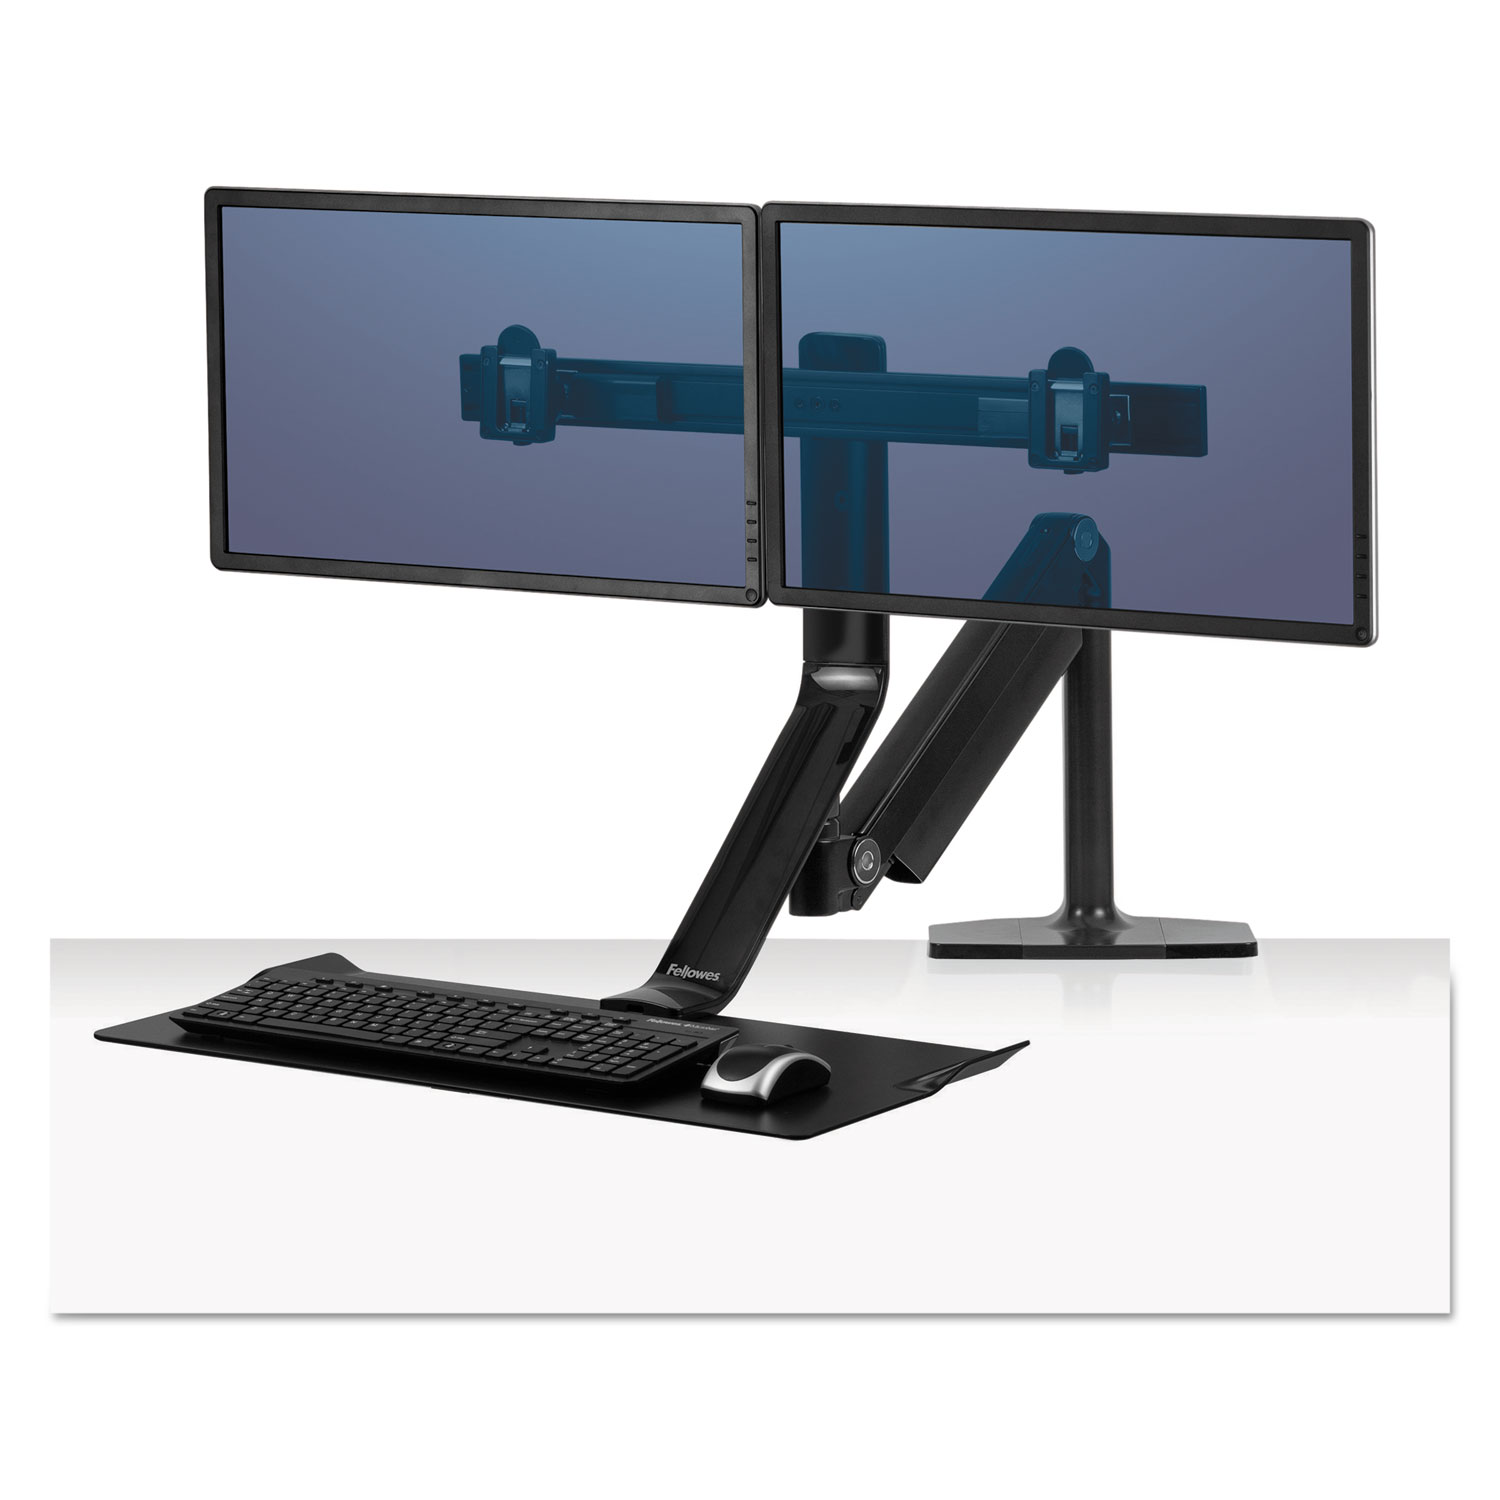 Extend Sit-Stand Workstation with Humanscale Technology, Dual Monitor, Black